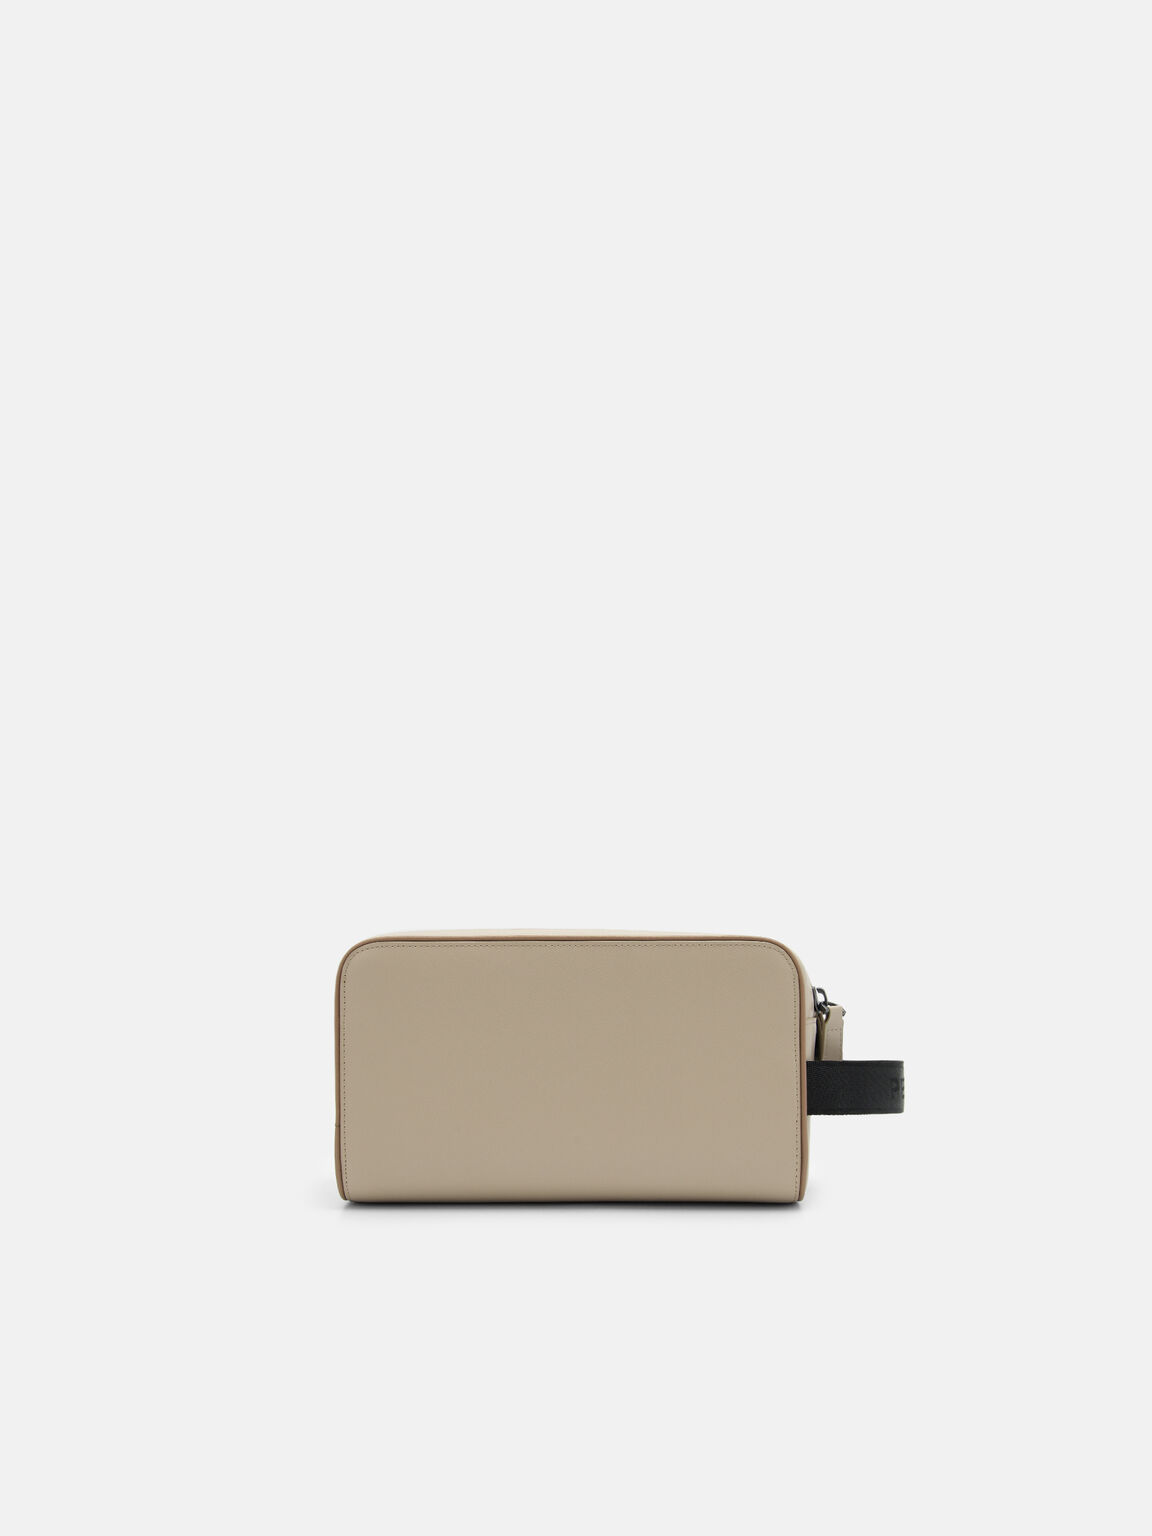 Leather Toiletries Pouch, Taupe